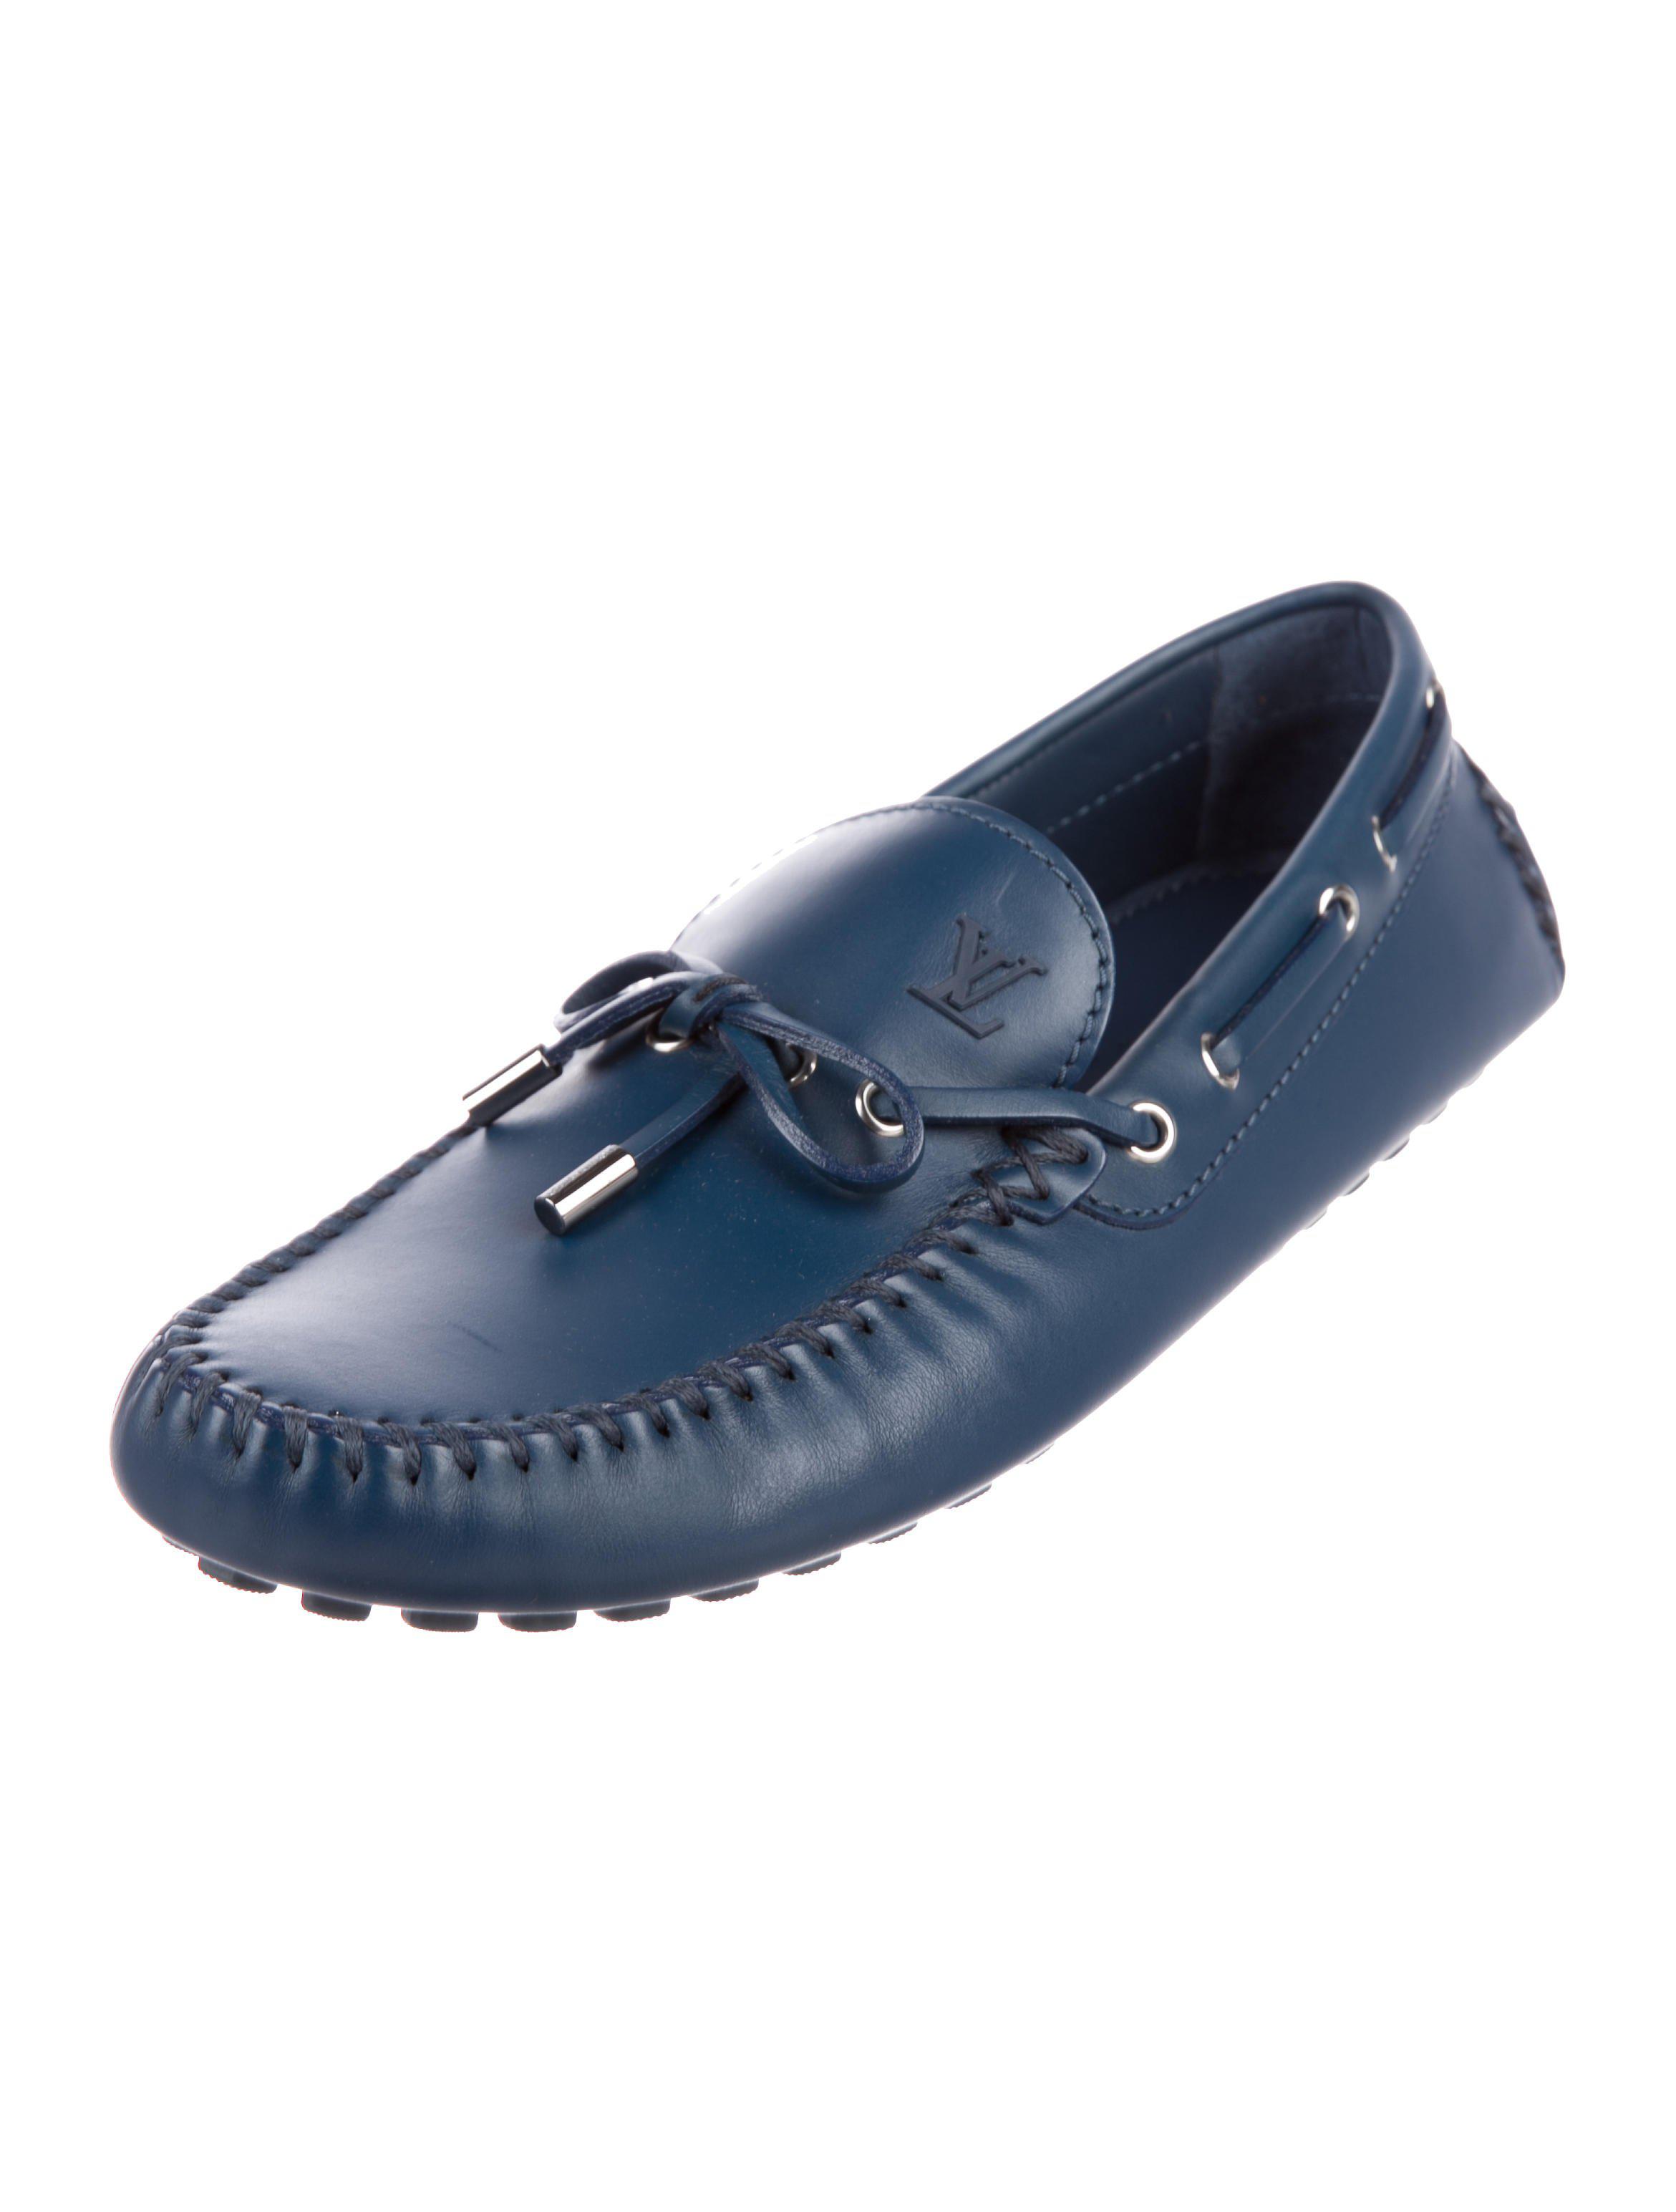 Lyst - Louis Vuitton Arizona Driving Loafers W/ Tags in Blue for Men